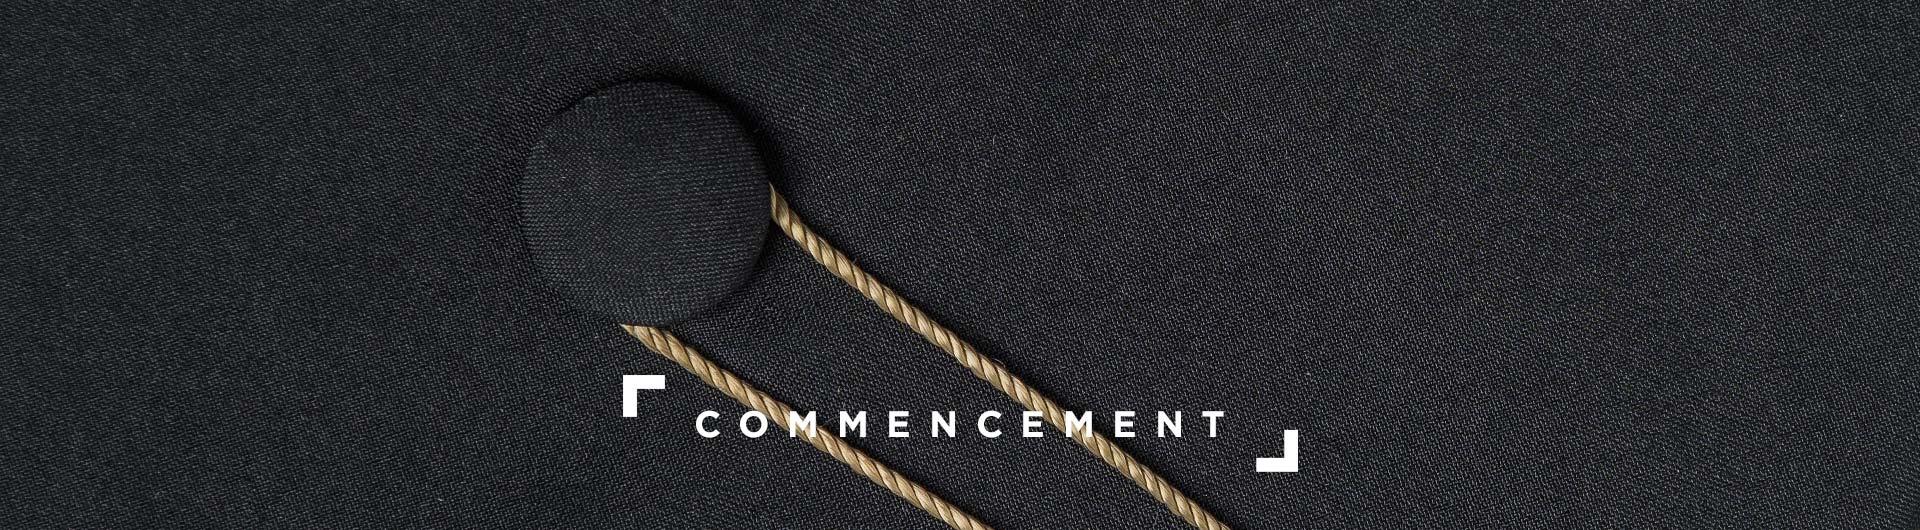 Closeup of the top of the mortarboard